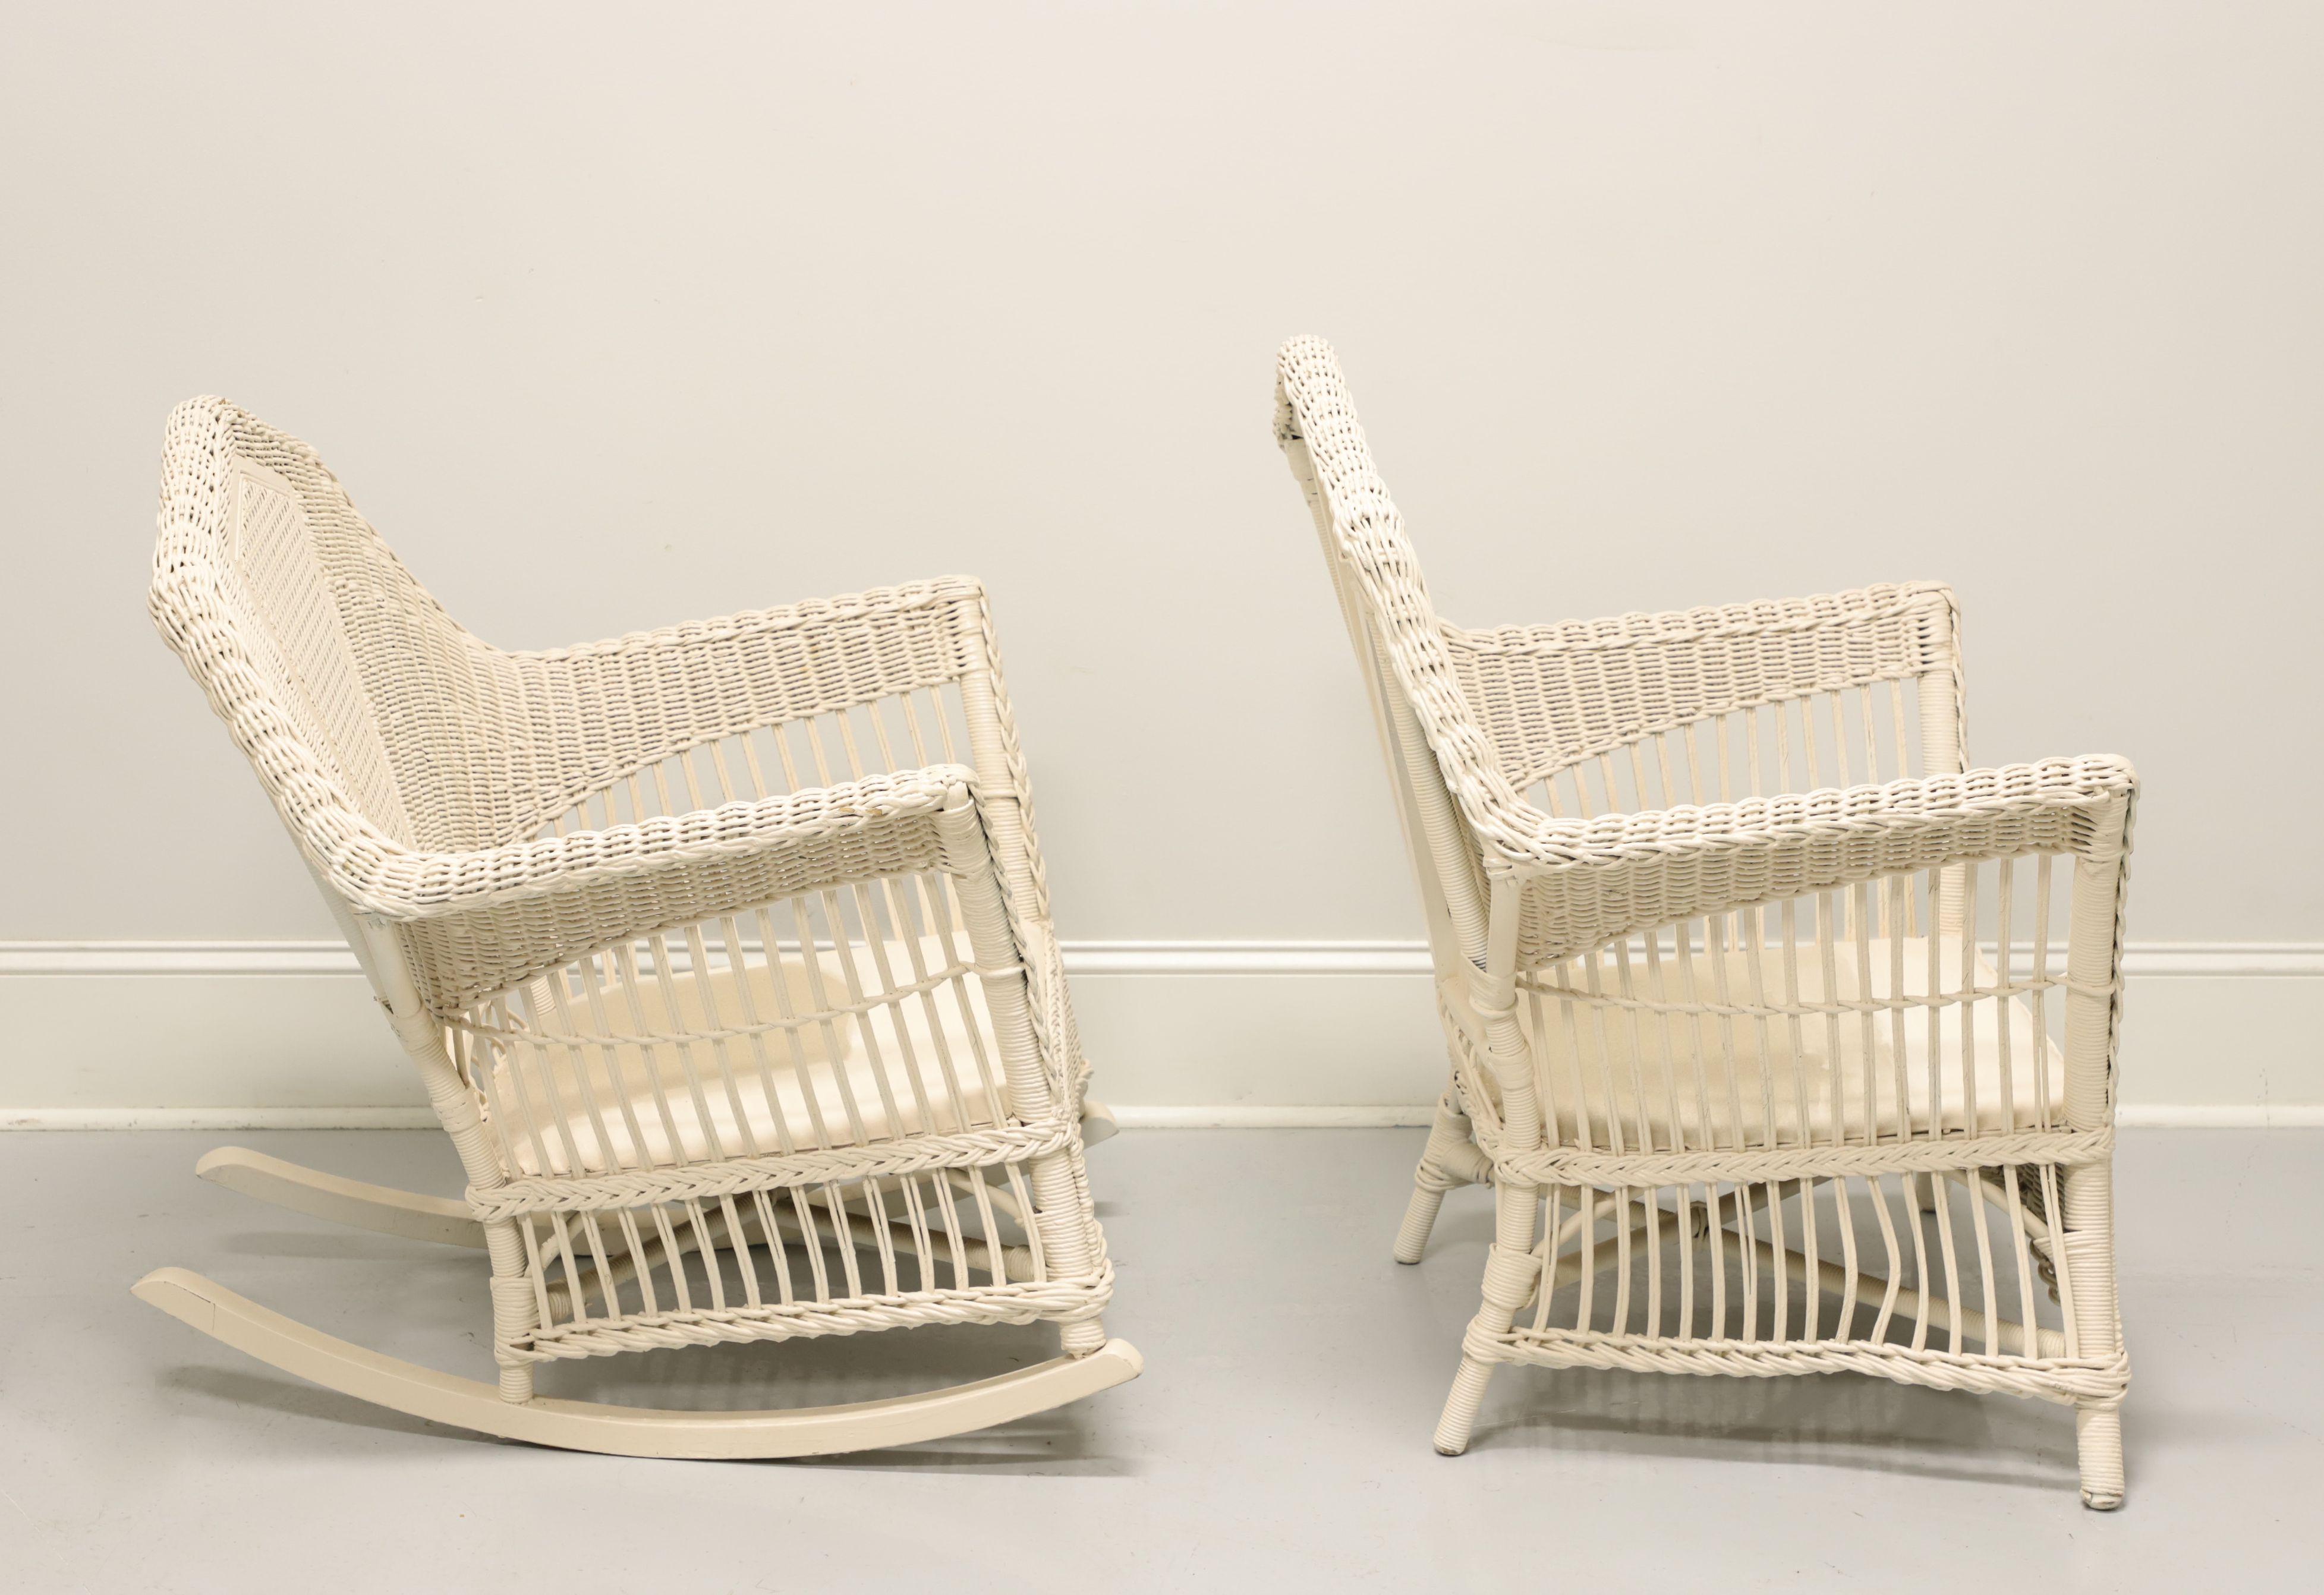 An antique Victorian wicker armchair and rocking chair pair, unbranded, in the manner of Heywood-Wakefield. White painted woven & stick wicker reed, cane, wood frame, canvas and metal spring cushion support. Features wicker wrapped frame, ornately